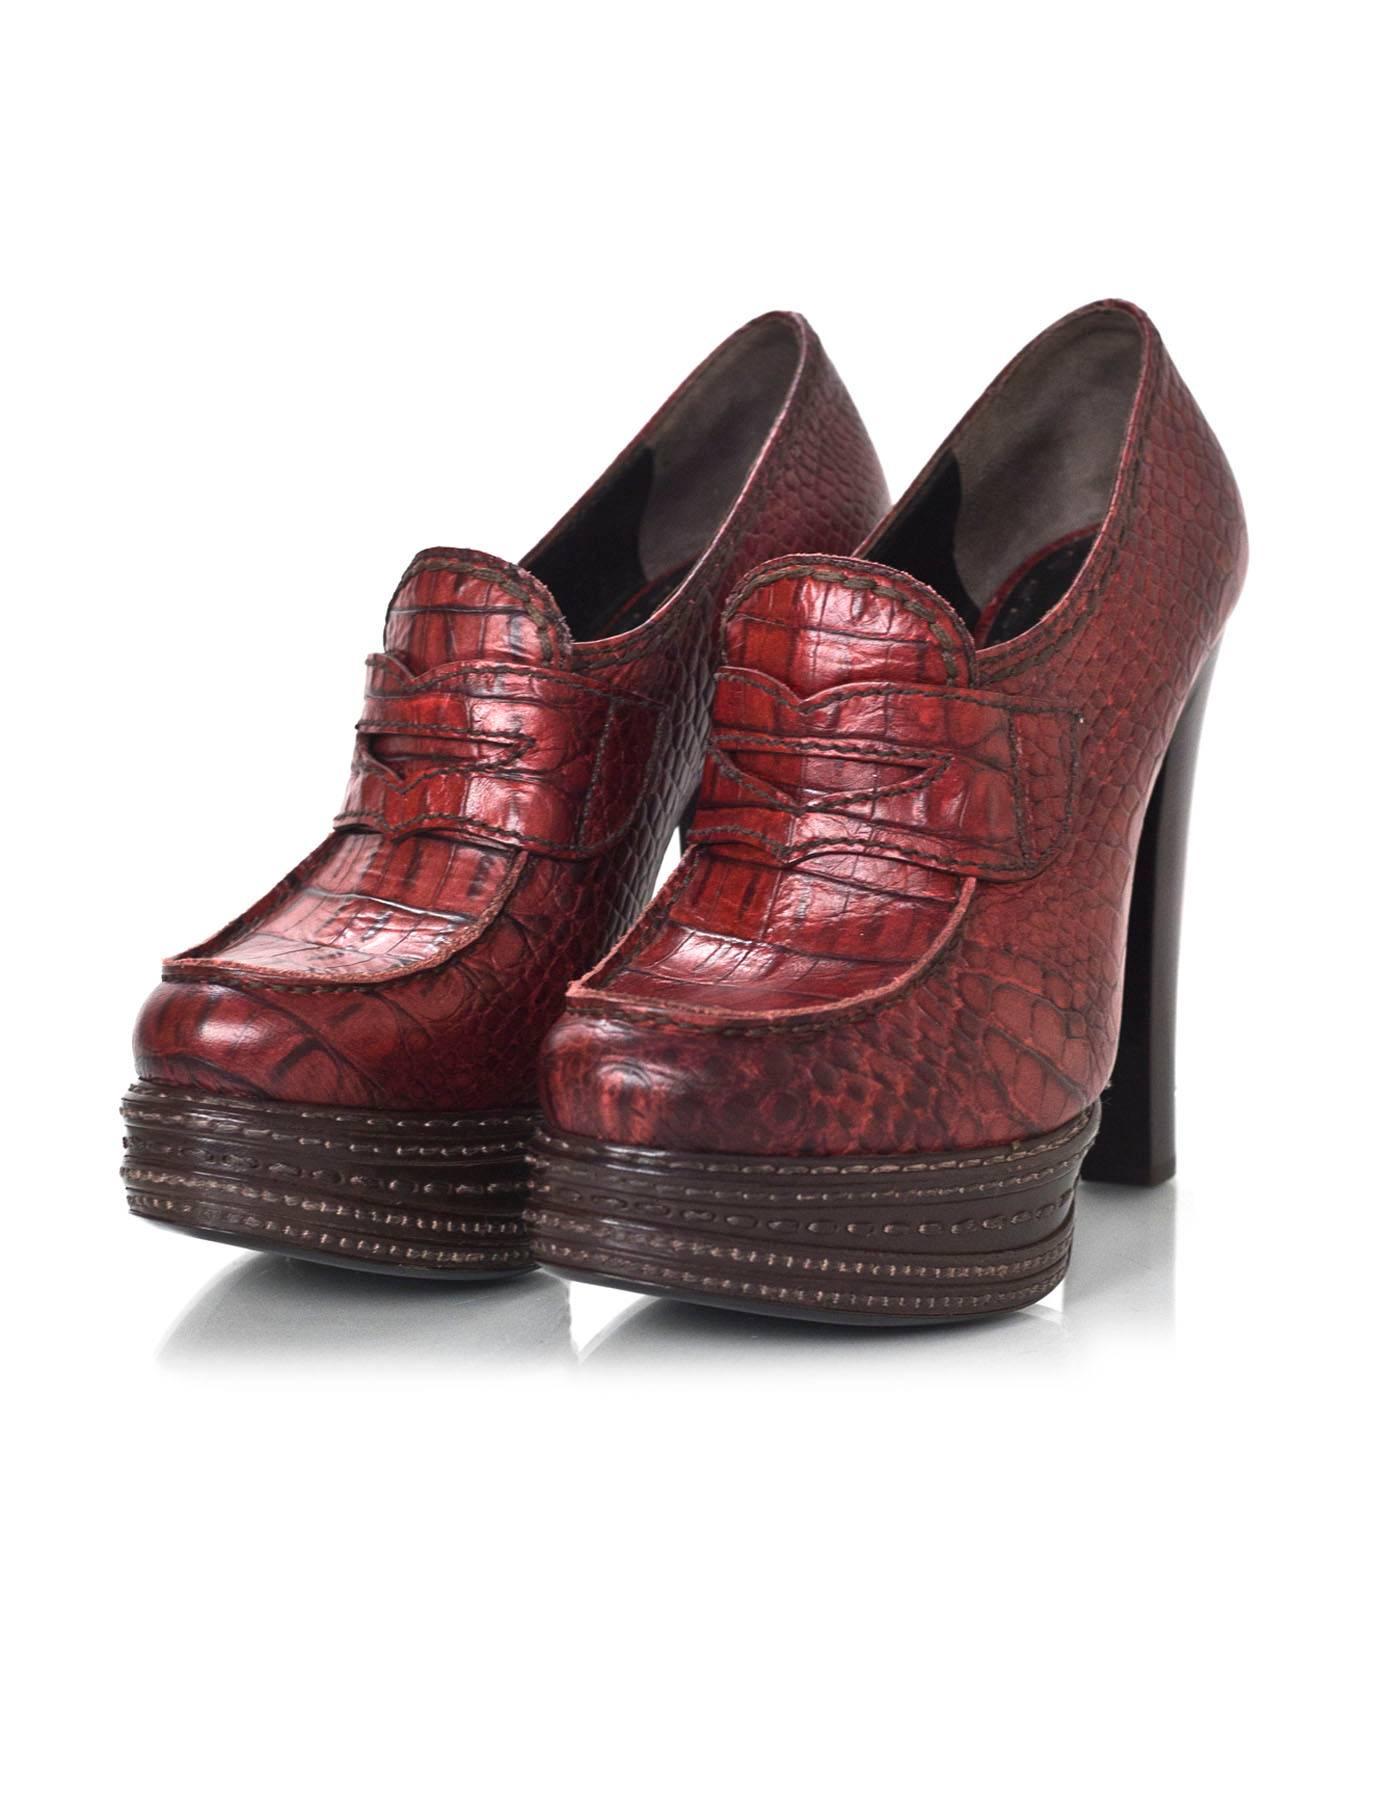 Prada Red Embossed Crocodile Platform Loafers Sz 38.5

Made In: Italy
Color: Red
Materials: Embossed leather
Closure/Opening: Slip on
Sole Stamp: Prada 38.5 Made in Italy
Overall Condition: Excellent pre-owned condition, dont appear to have been